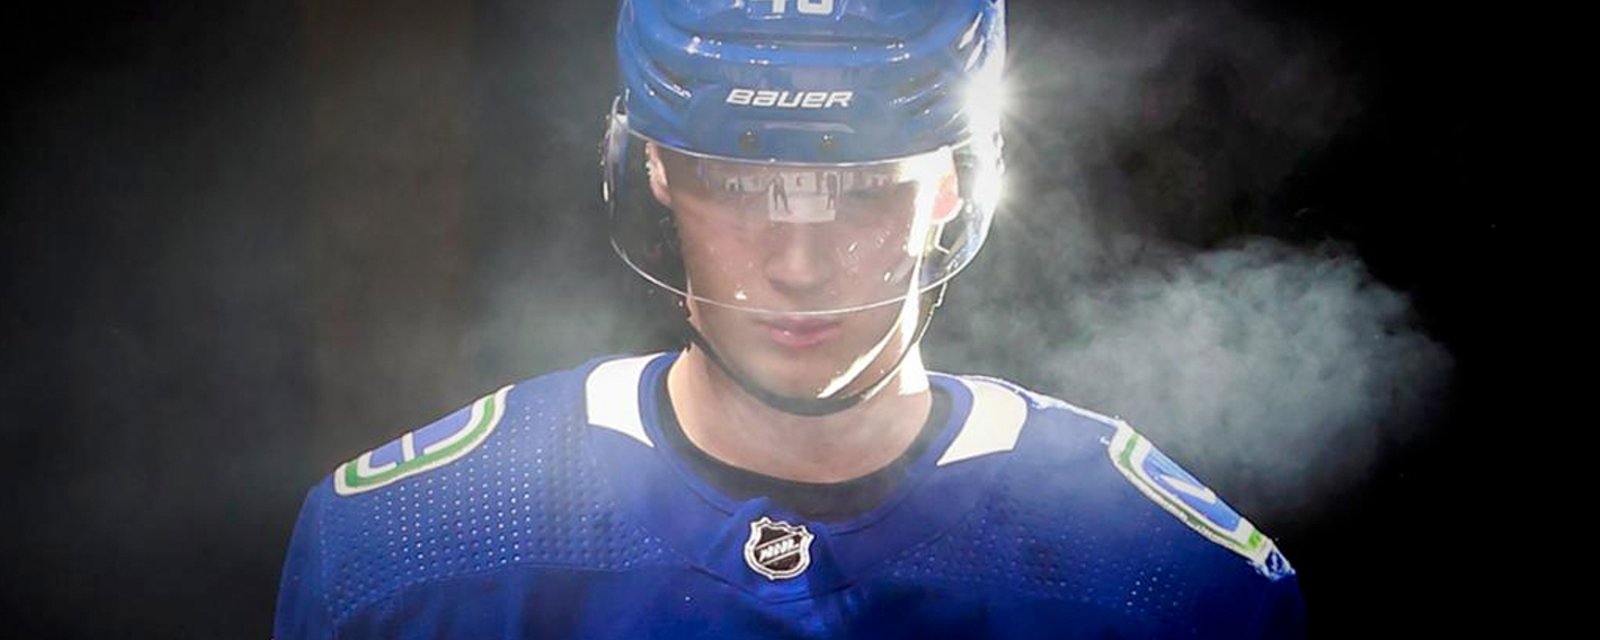 All 28 goals from Elias Pettersson’s incredible rookie season